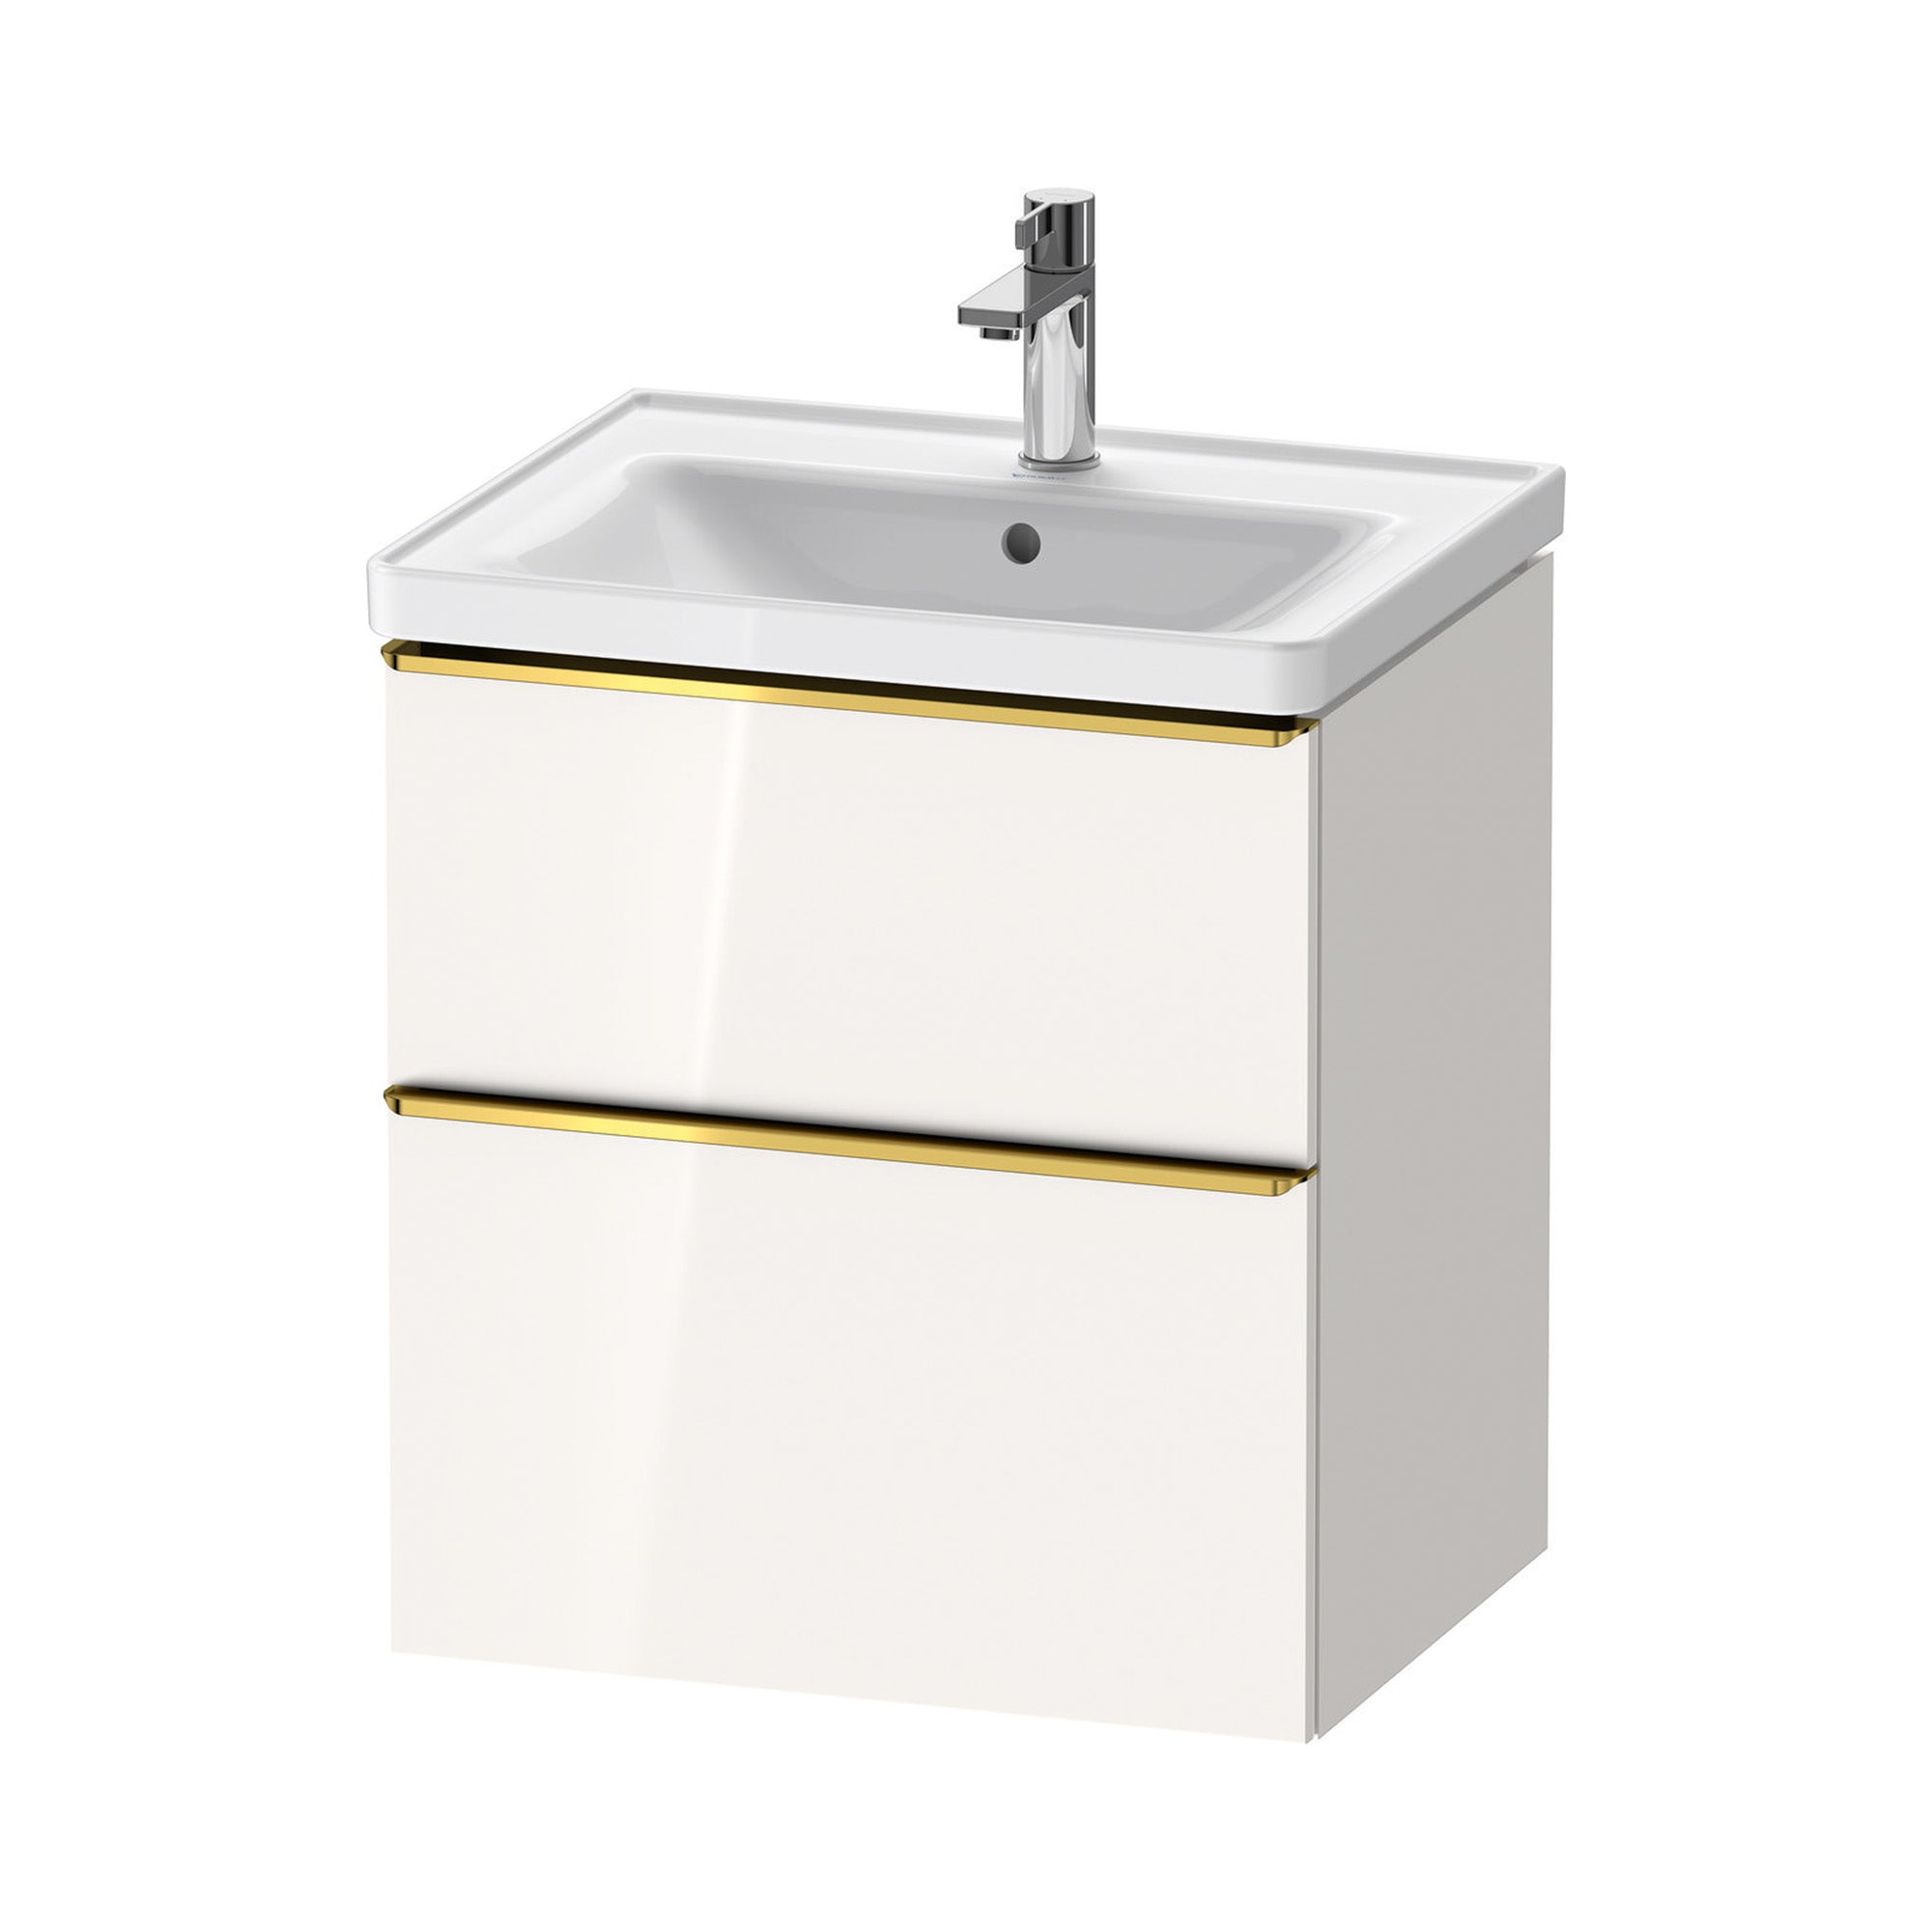 duravit d-neo 600 wall mounted vanity unit with d-neo basin gloss white gold handles